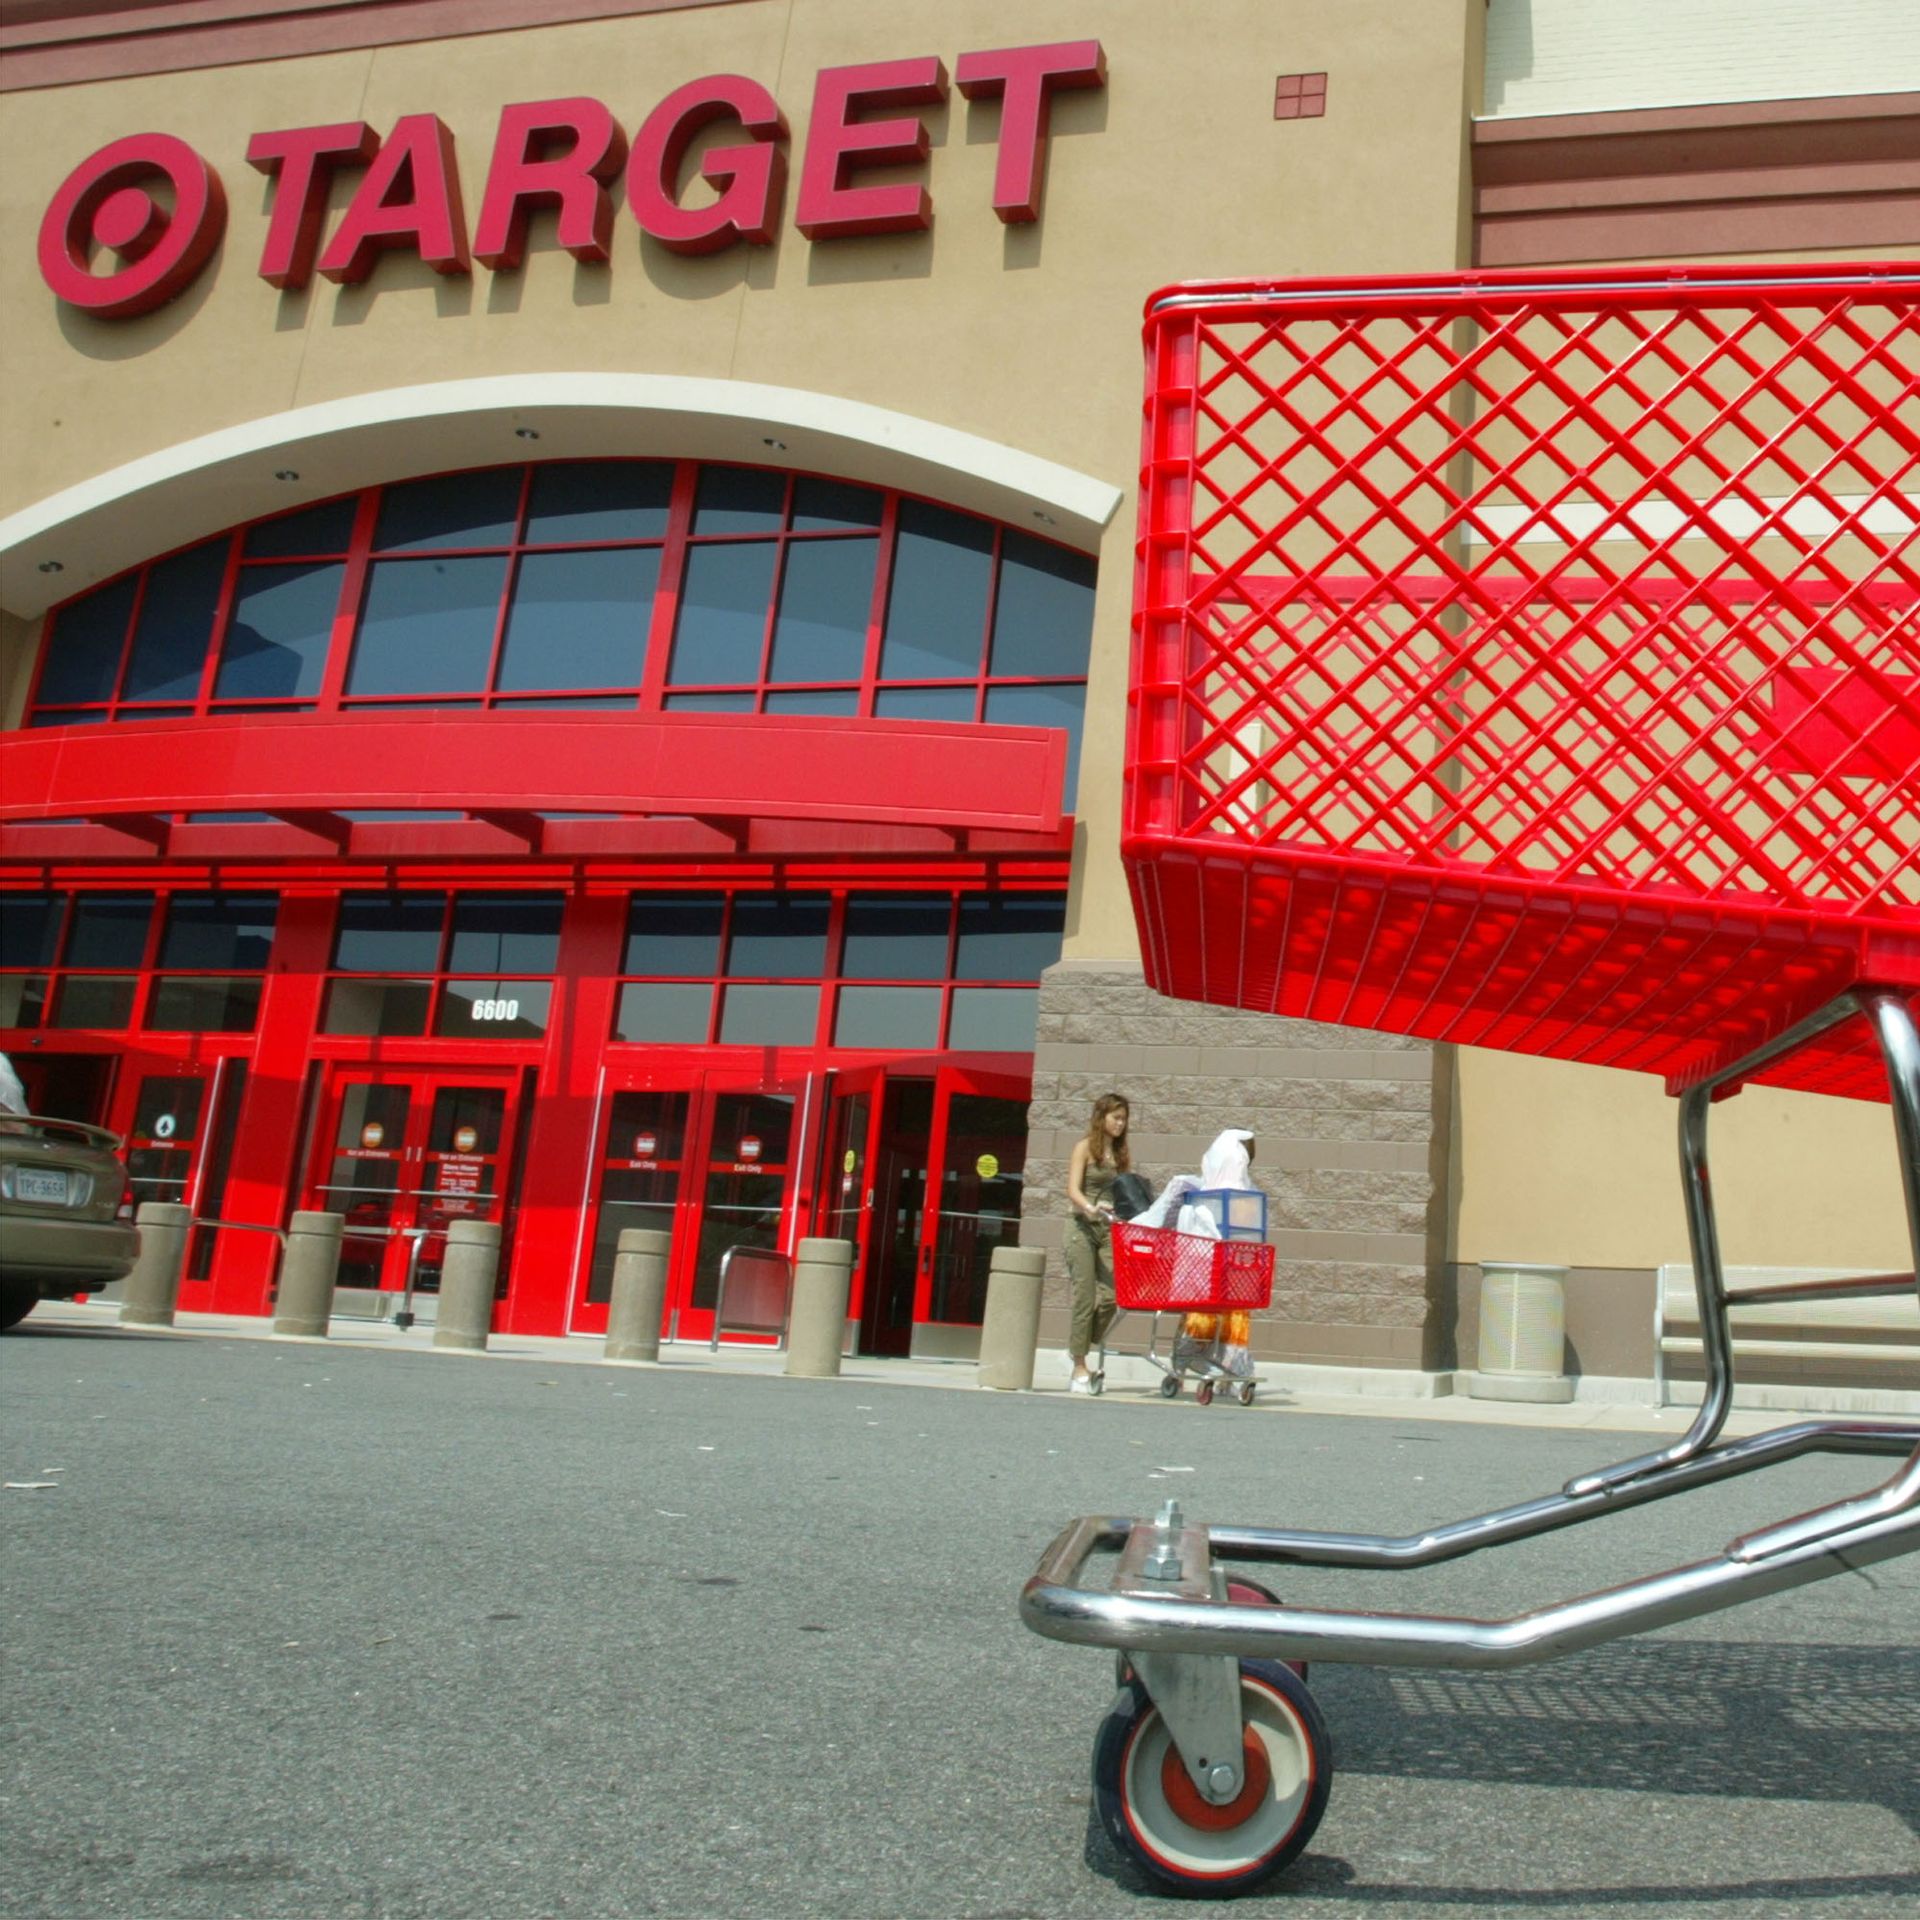 A shopping cart outside a Target store.